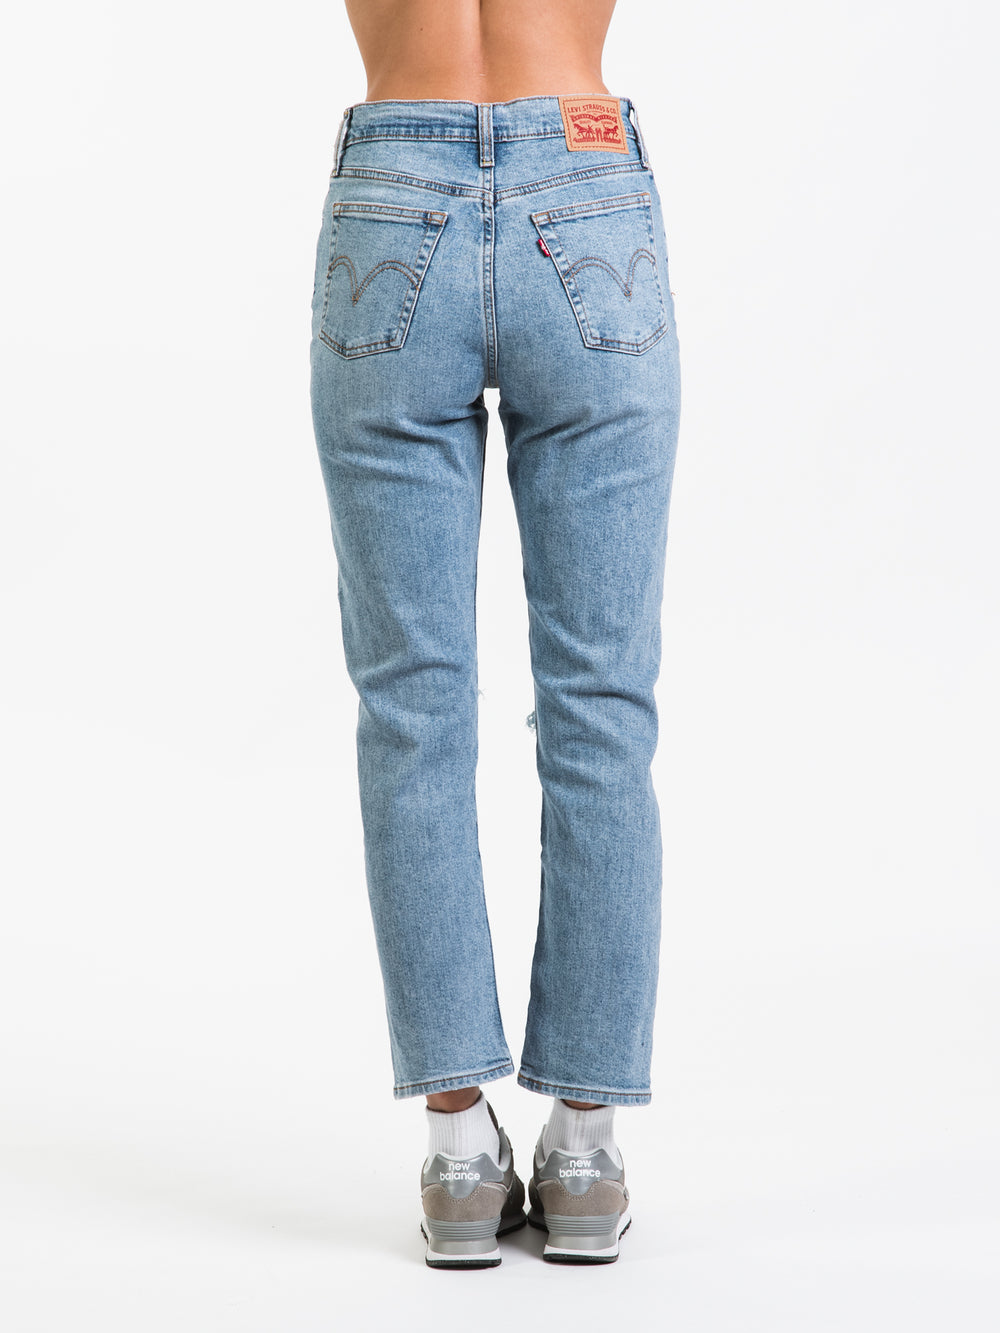 LEVIS WEDGIE STRAIGHT JEAN  - CLEARANCE